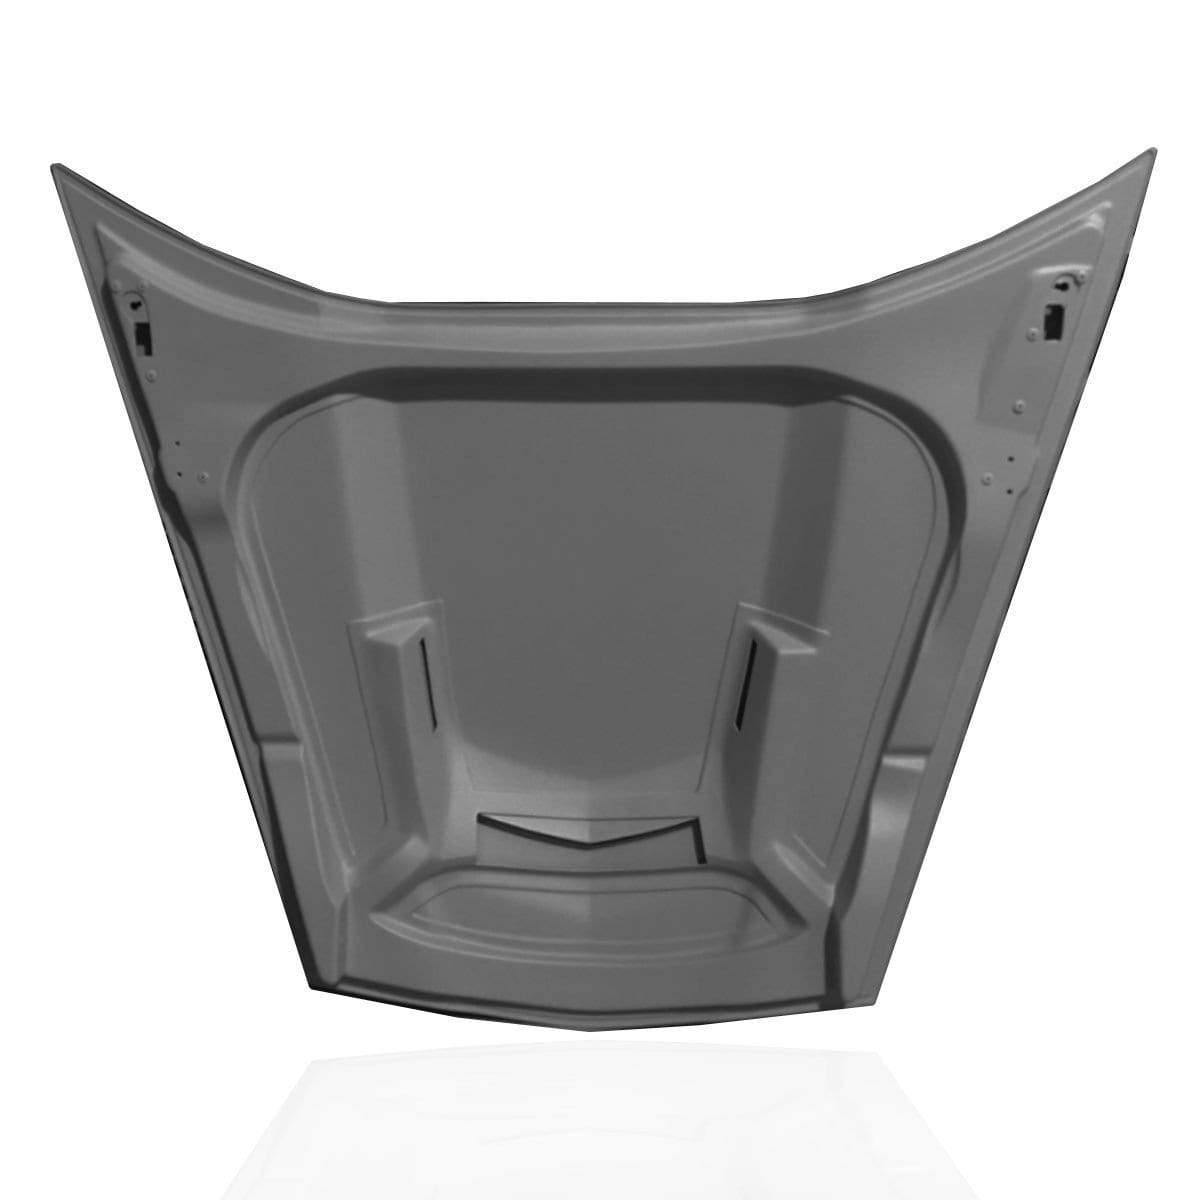 ACS Composite L88 Extractor Hood for C6 Corvette, SKU 27-4-031 PRM - Lightweight, heat-resistant, and strong hood with efficient heat extraction and water management system.